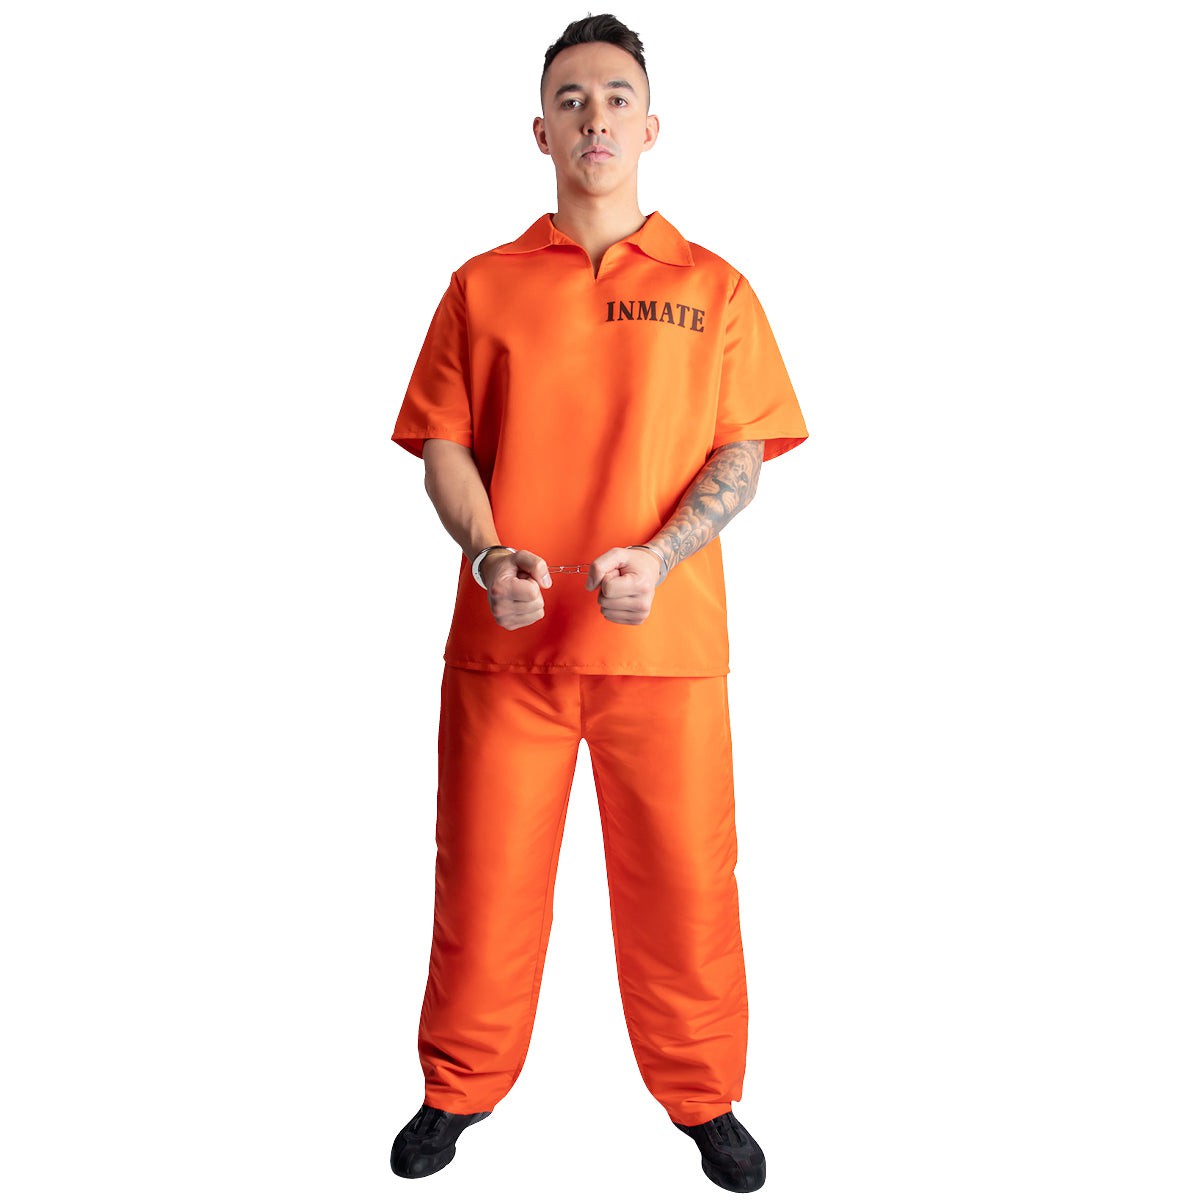 Inmate Costume for Adults, Orange Top and Pants – Party Expert